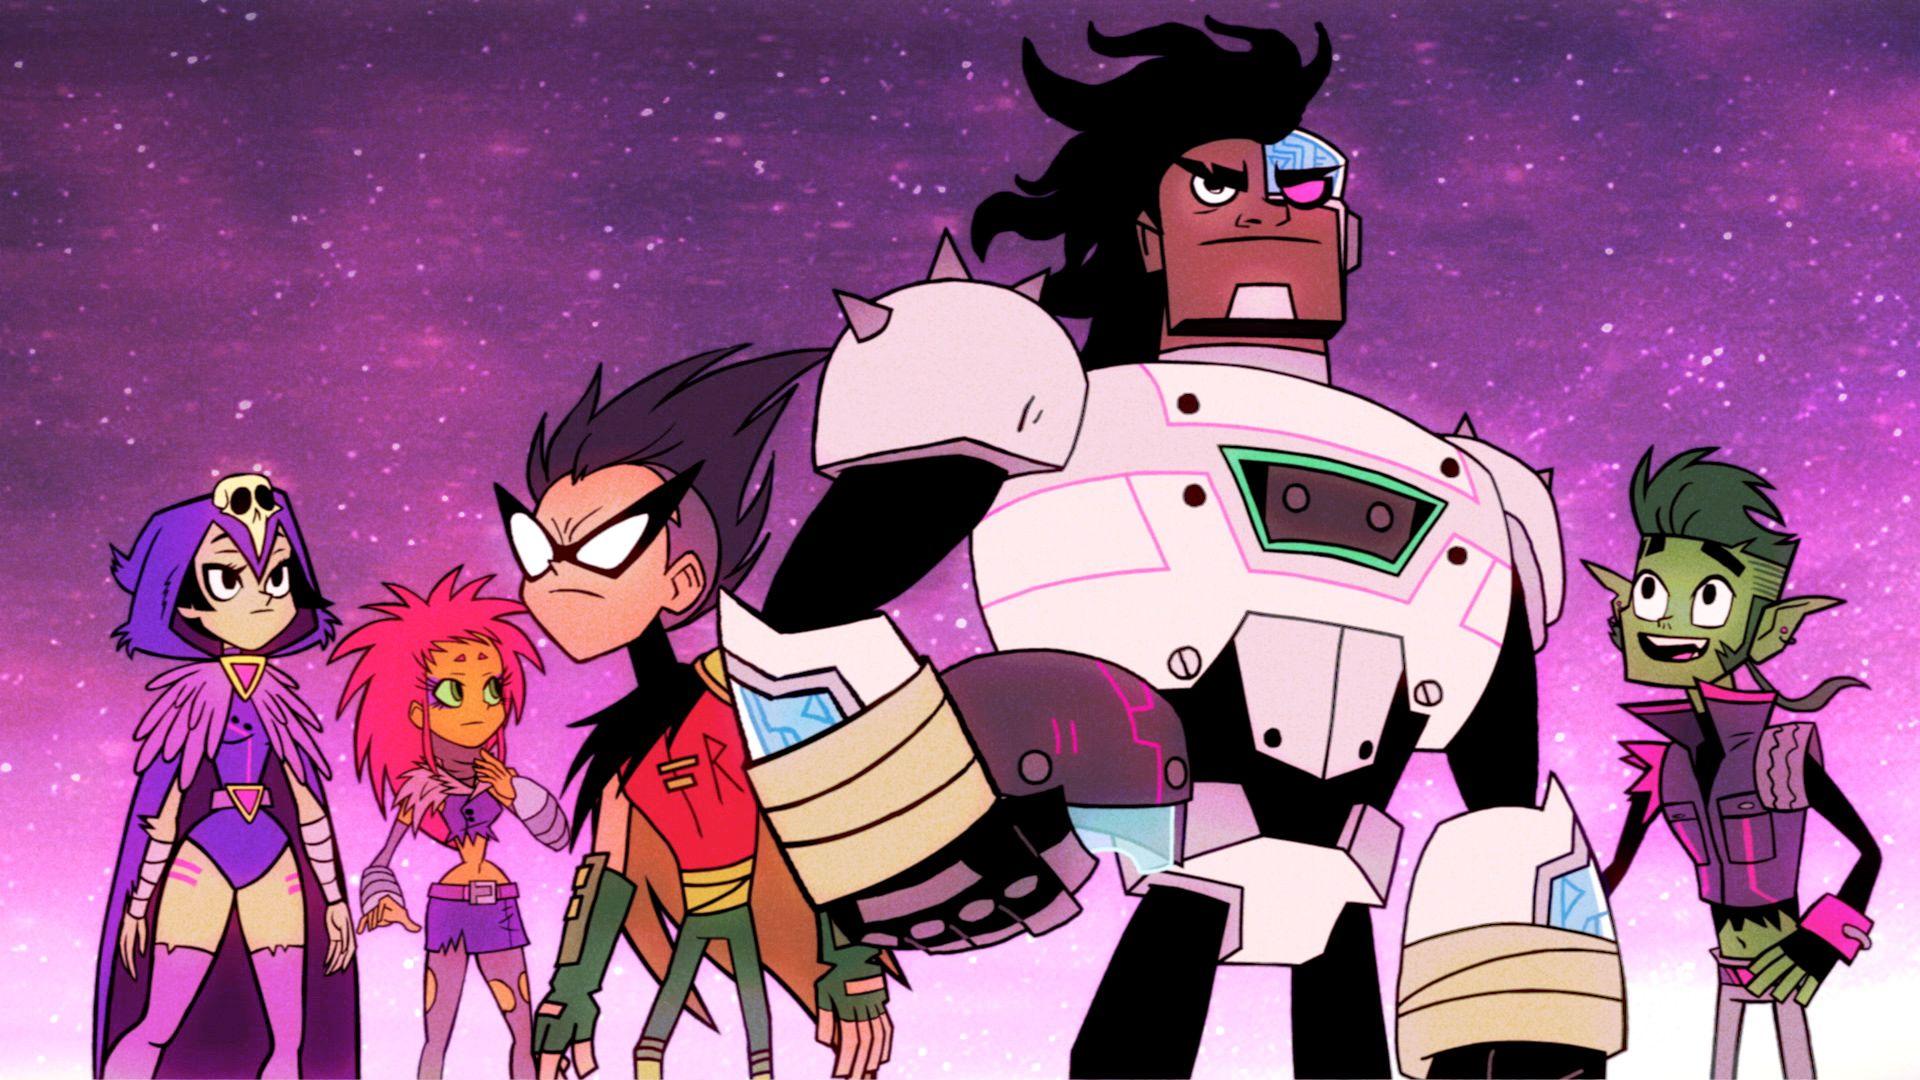 Teen Titans Go! The Night Begins to Shine Week & SDCC Interviews